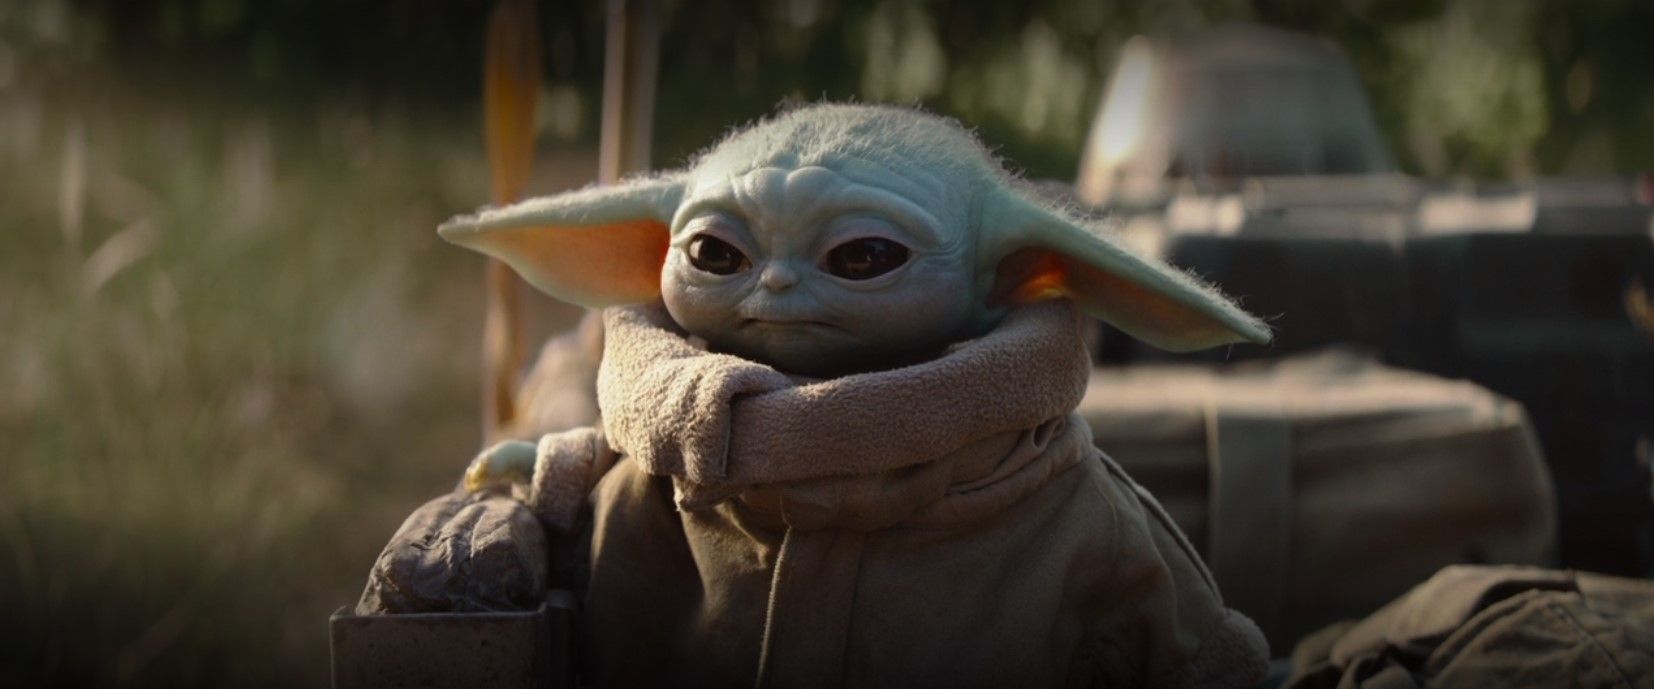 You Can Now Order An Animatronic Baby Yoda, And This IS The Way!